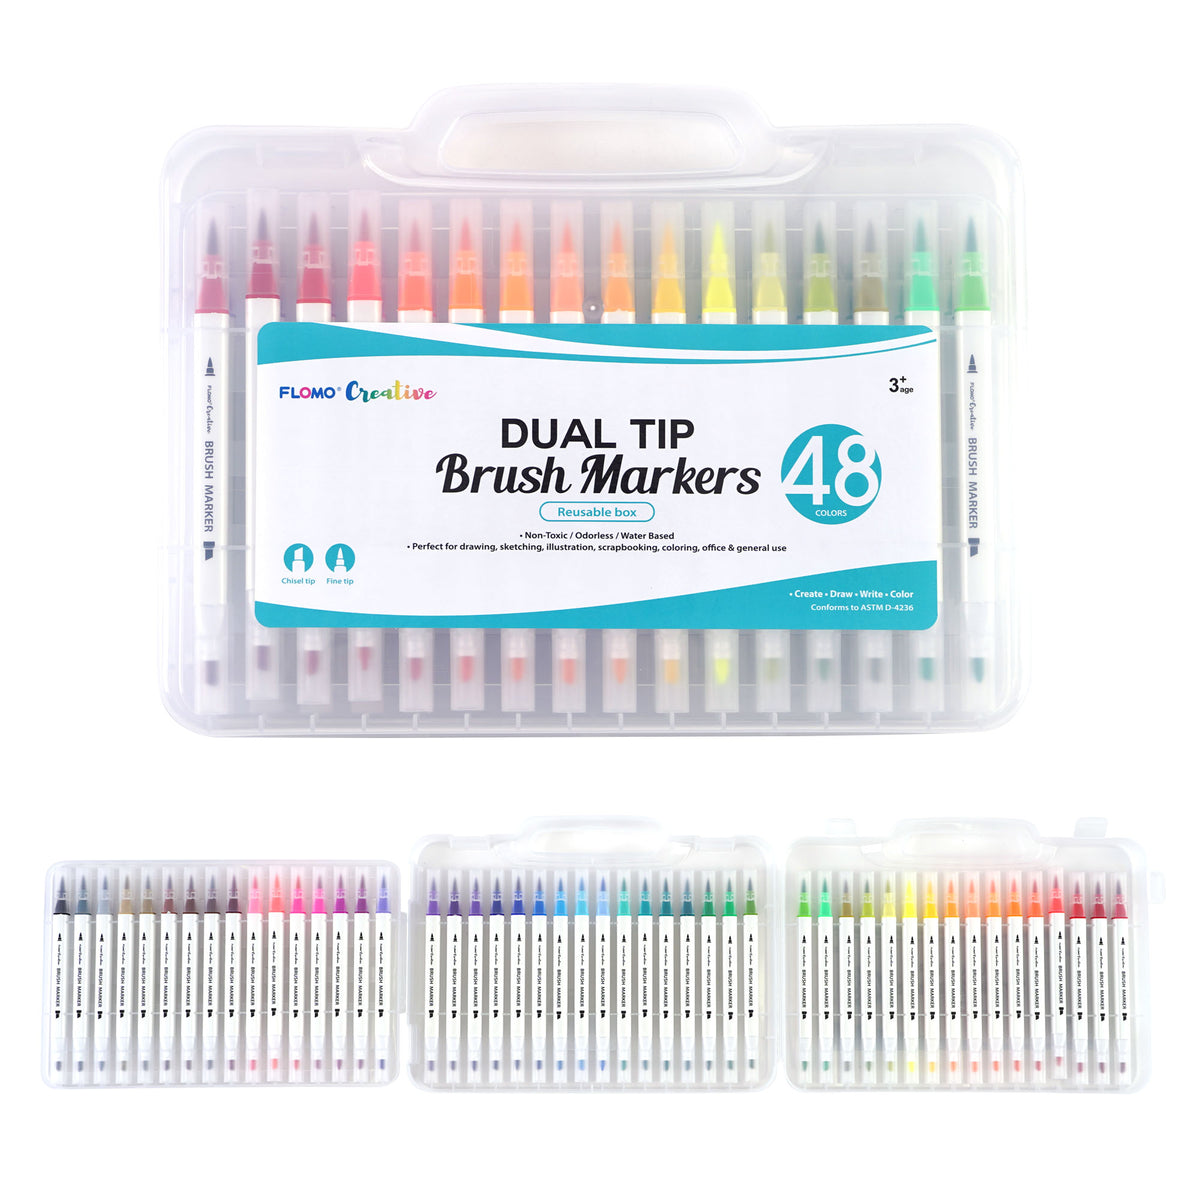 Dual Tip Brushes & Fineliners (48pc) – Harepin Creative